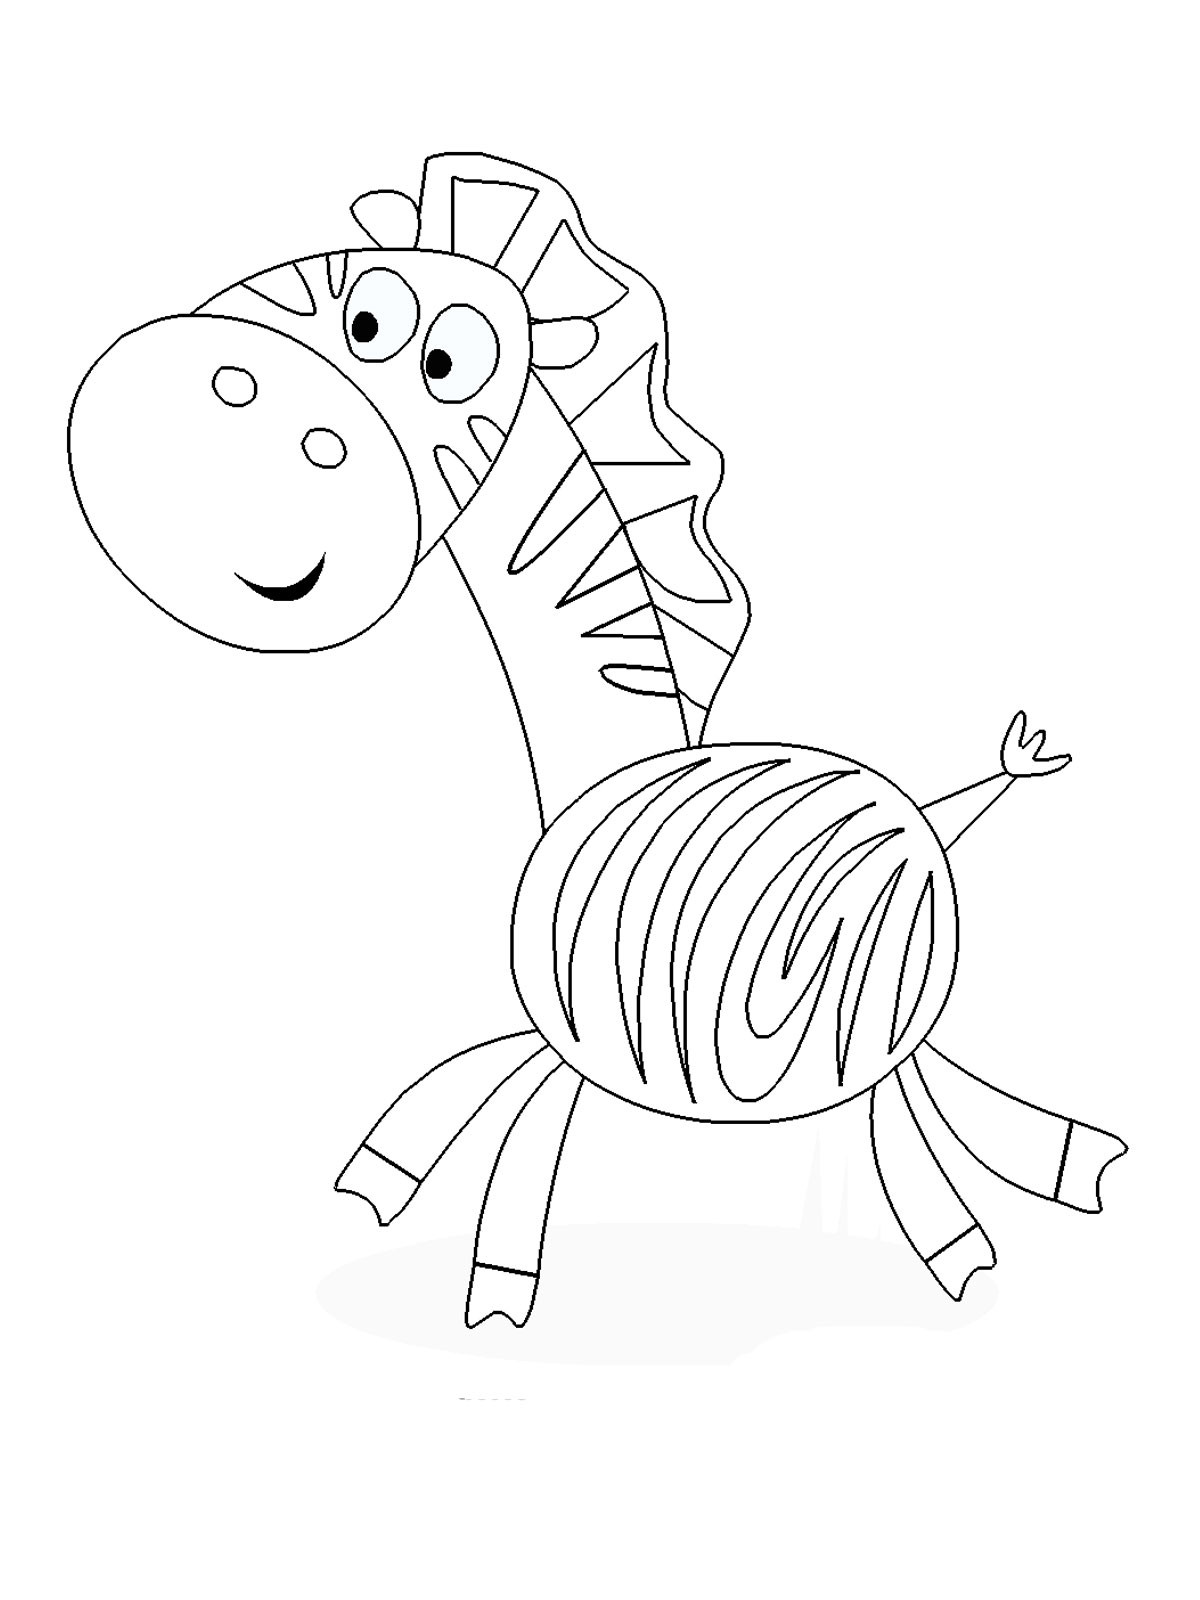 Coloring Pages Kids Com
 Printable coloring pages for kids